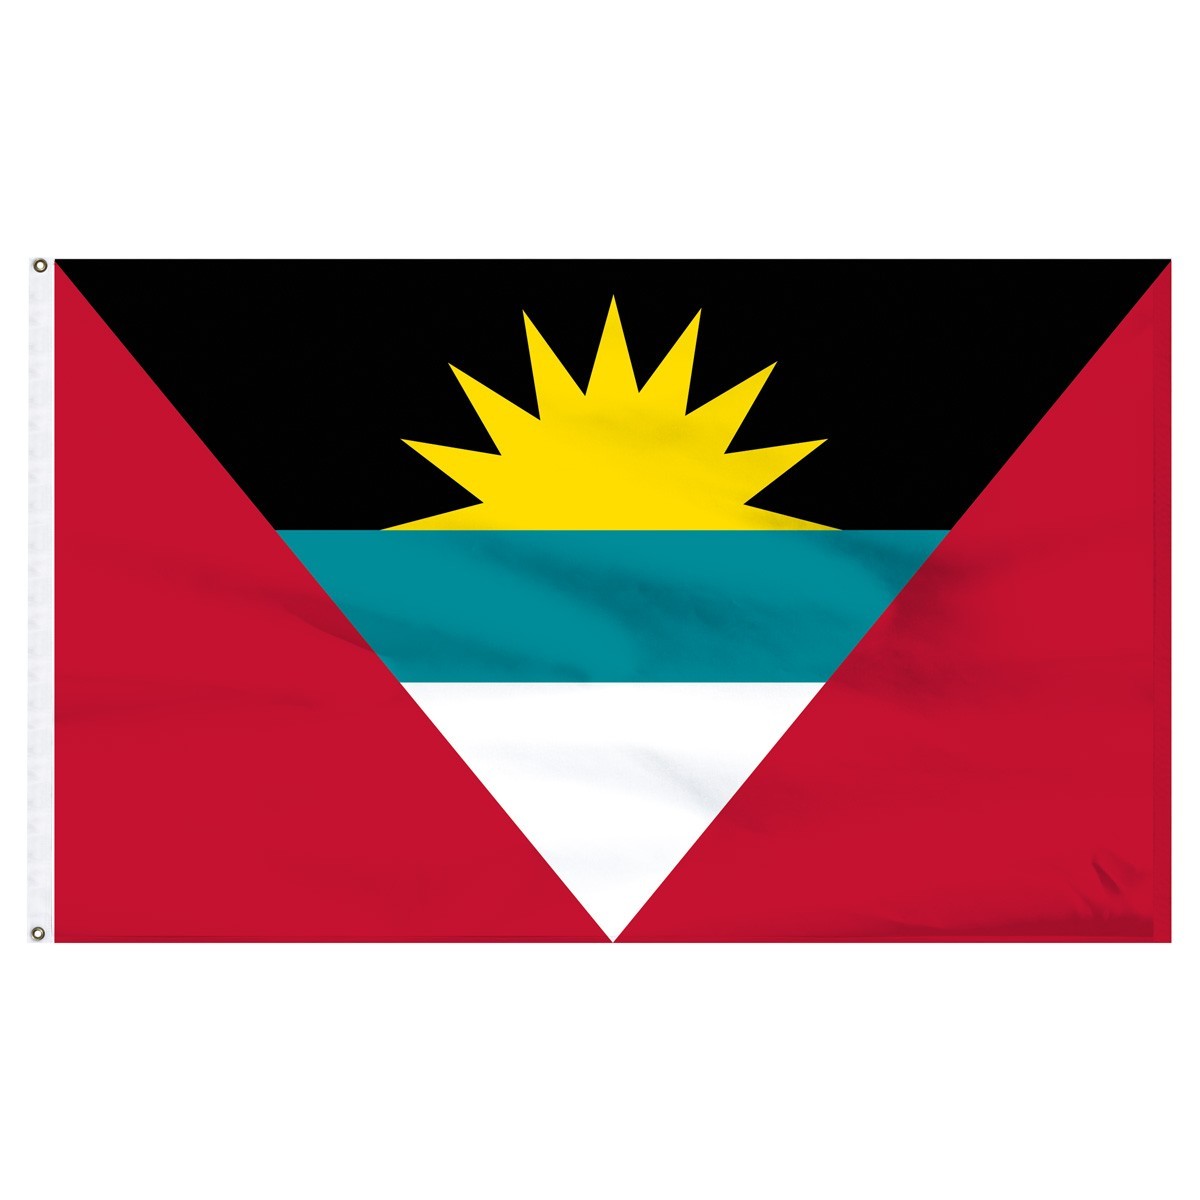 Shop Antigua and Barbuda flags for sale